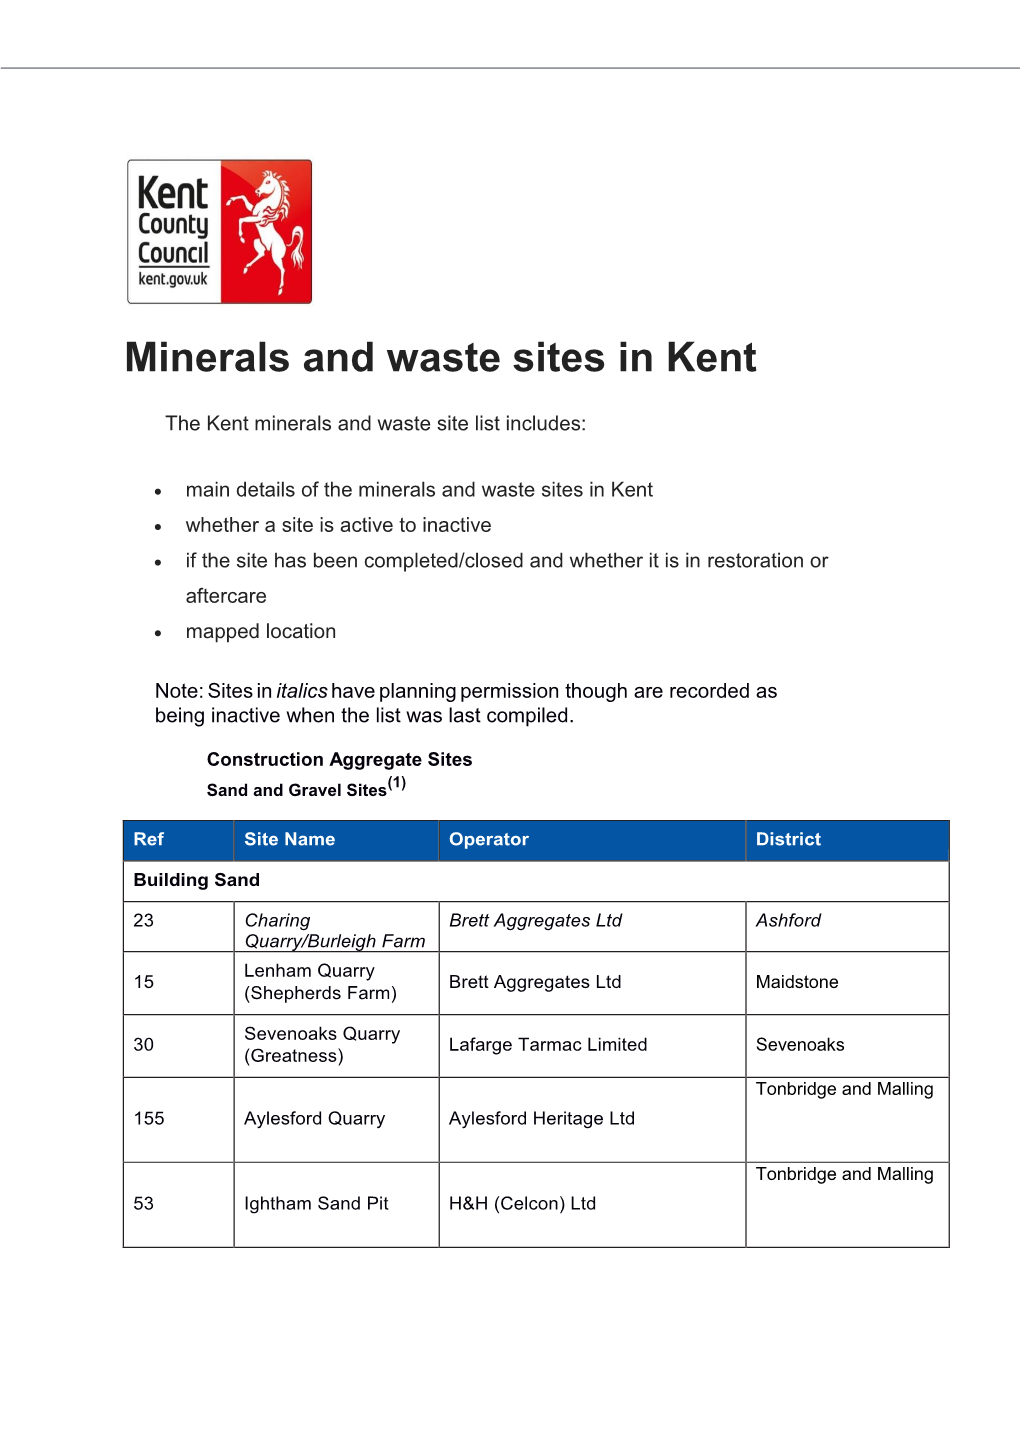 Minerals and Waste Sites in Kent